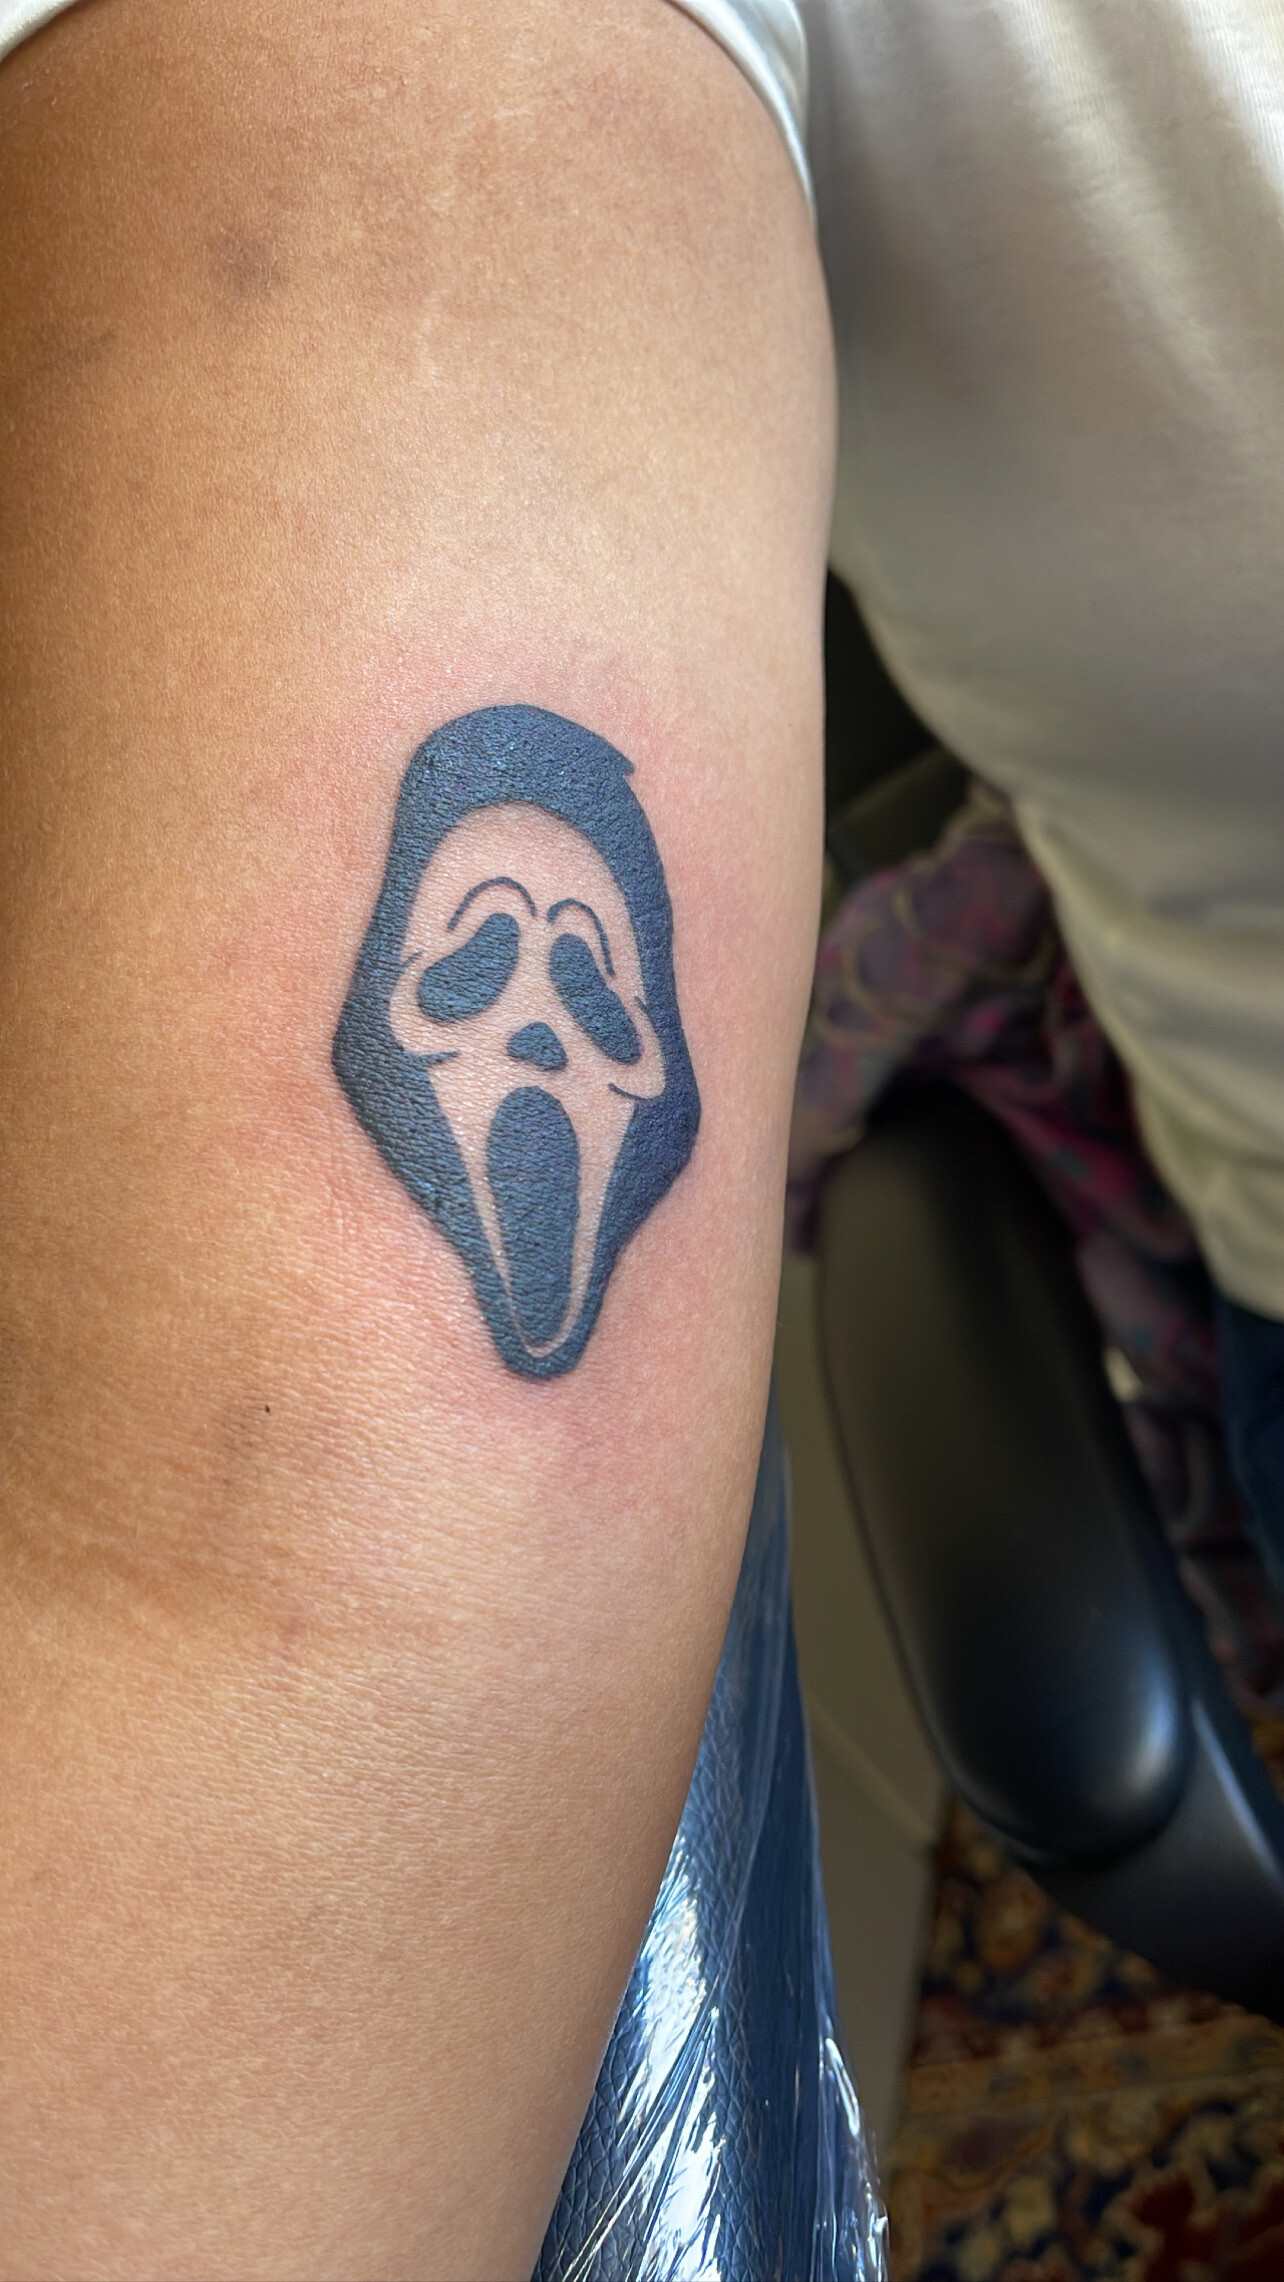 Tattoo uploaded by Stacie Mayer  Ghost face and Drew Barrymore Scream  inspired tattoo by Shane Murphy blackandgrey realism horror Scream  GhostFace DrewBarrymore ShaneMurphy  Tattoodo